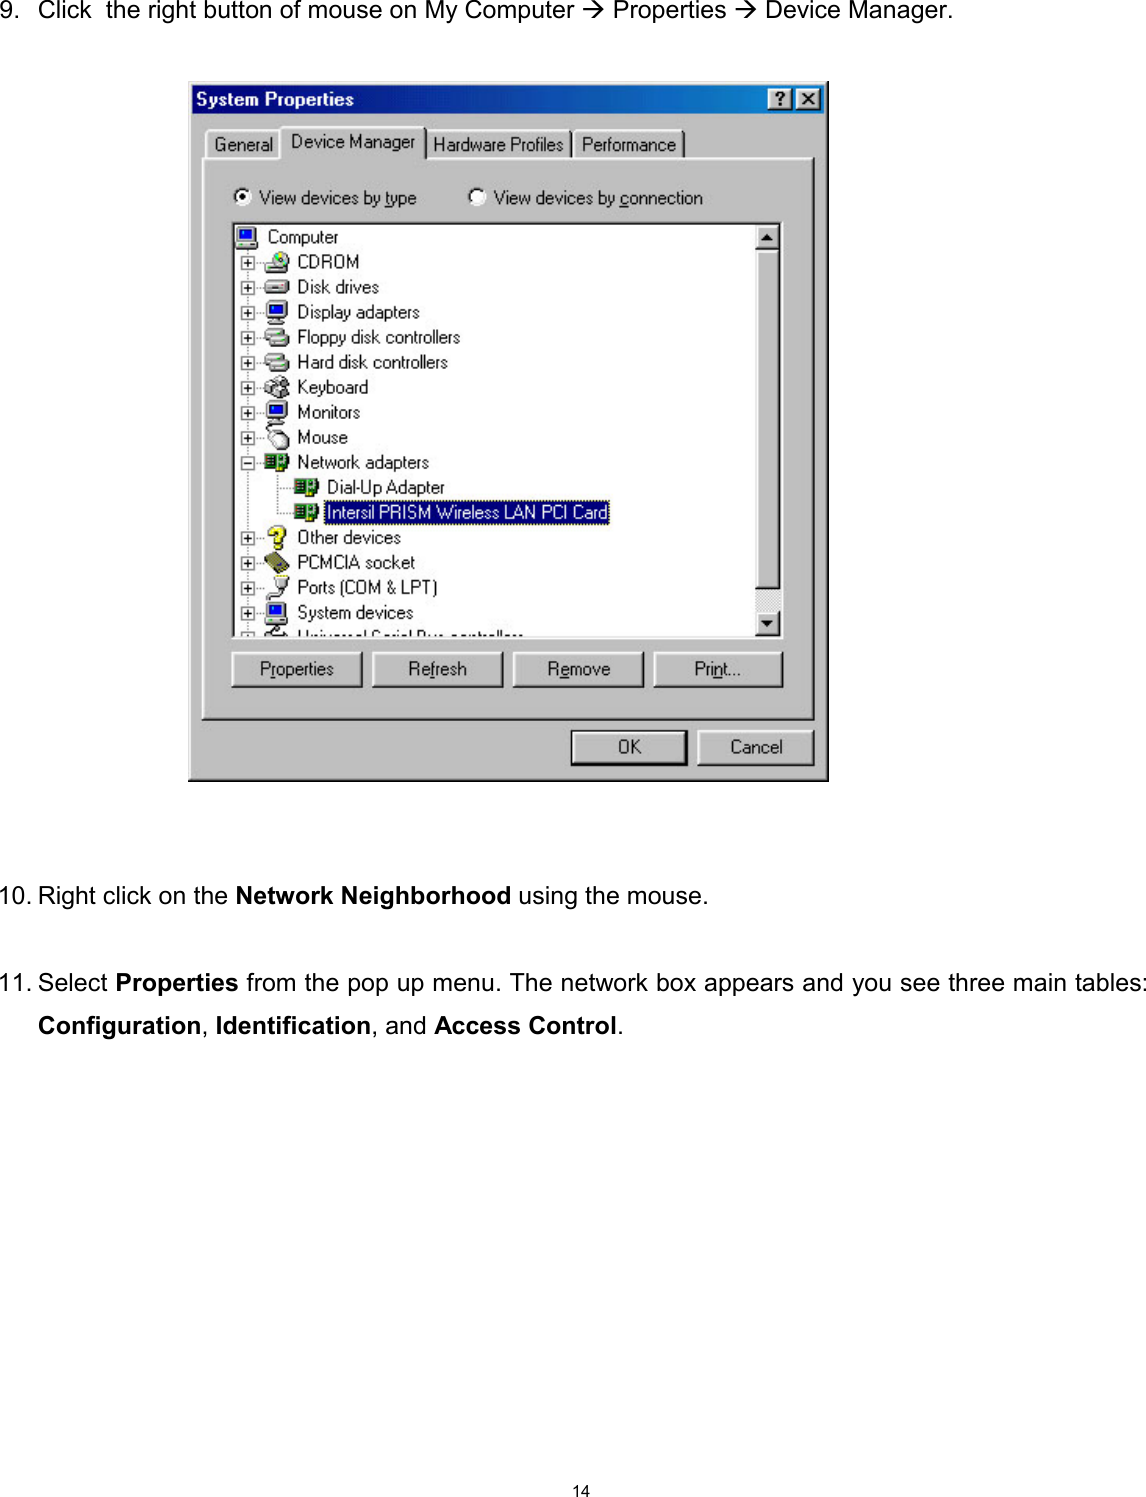  14   9.  Click  the right button of mouse on My Computer  Properties  Device Manager.                                 10. Right click on the Network Neighborhood using the mouse.  11. Select Properties from the pop up menu. The network box appears and you see three main tables: Configuration, Identification, and Access Control.   